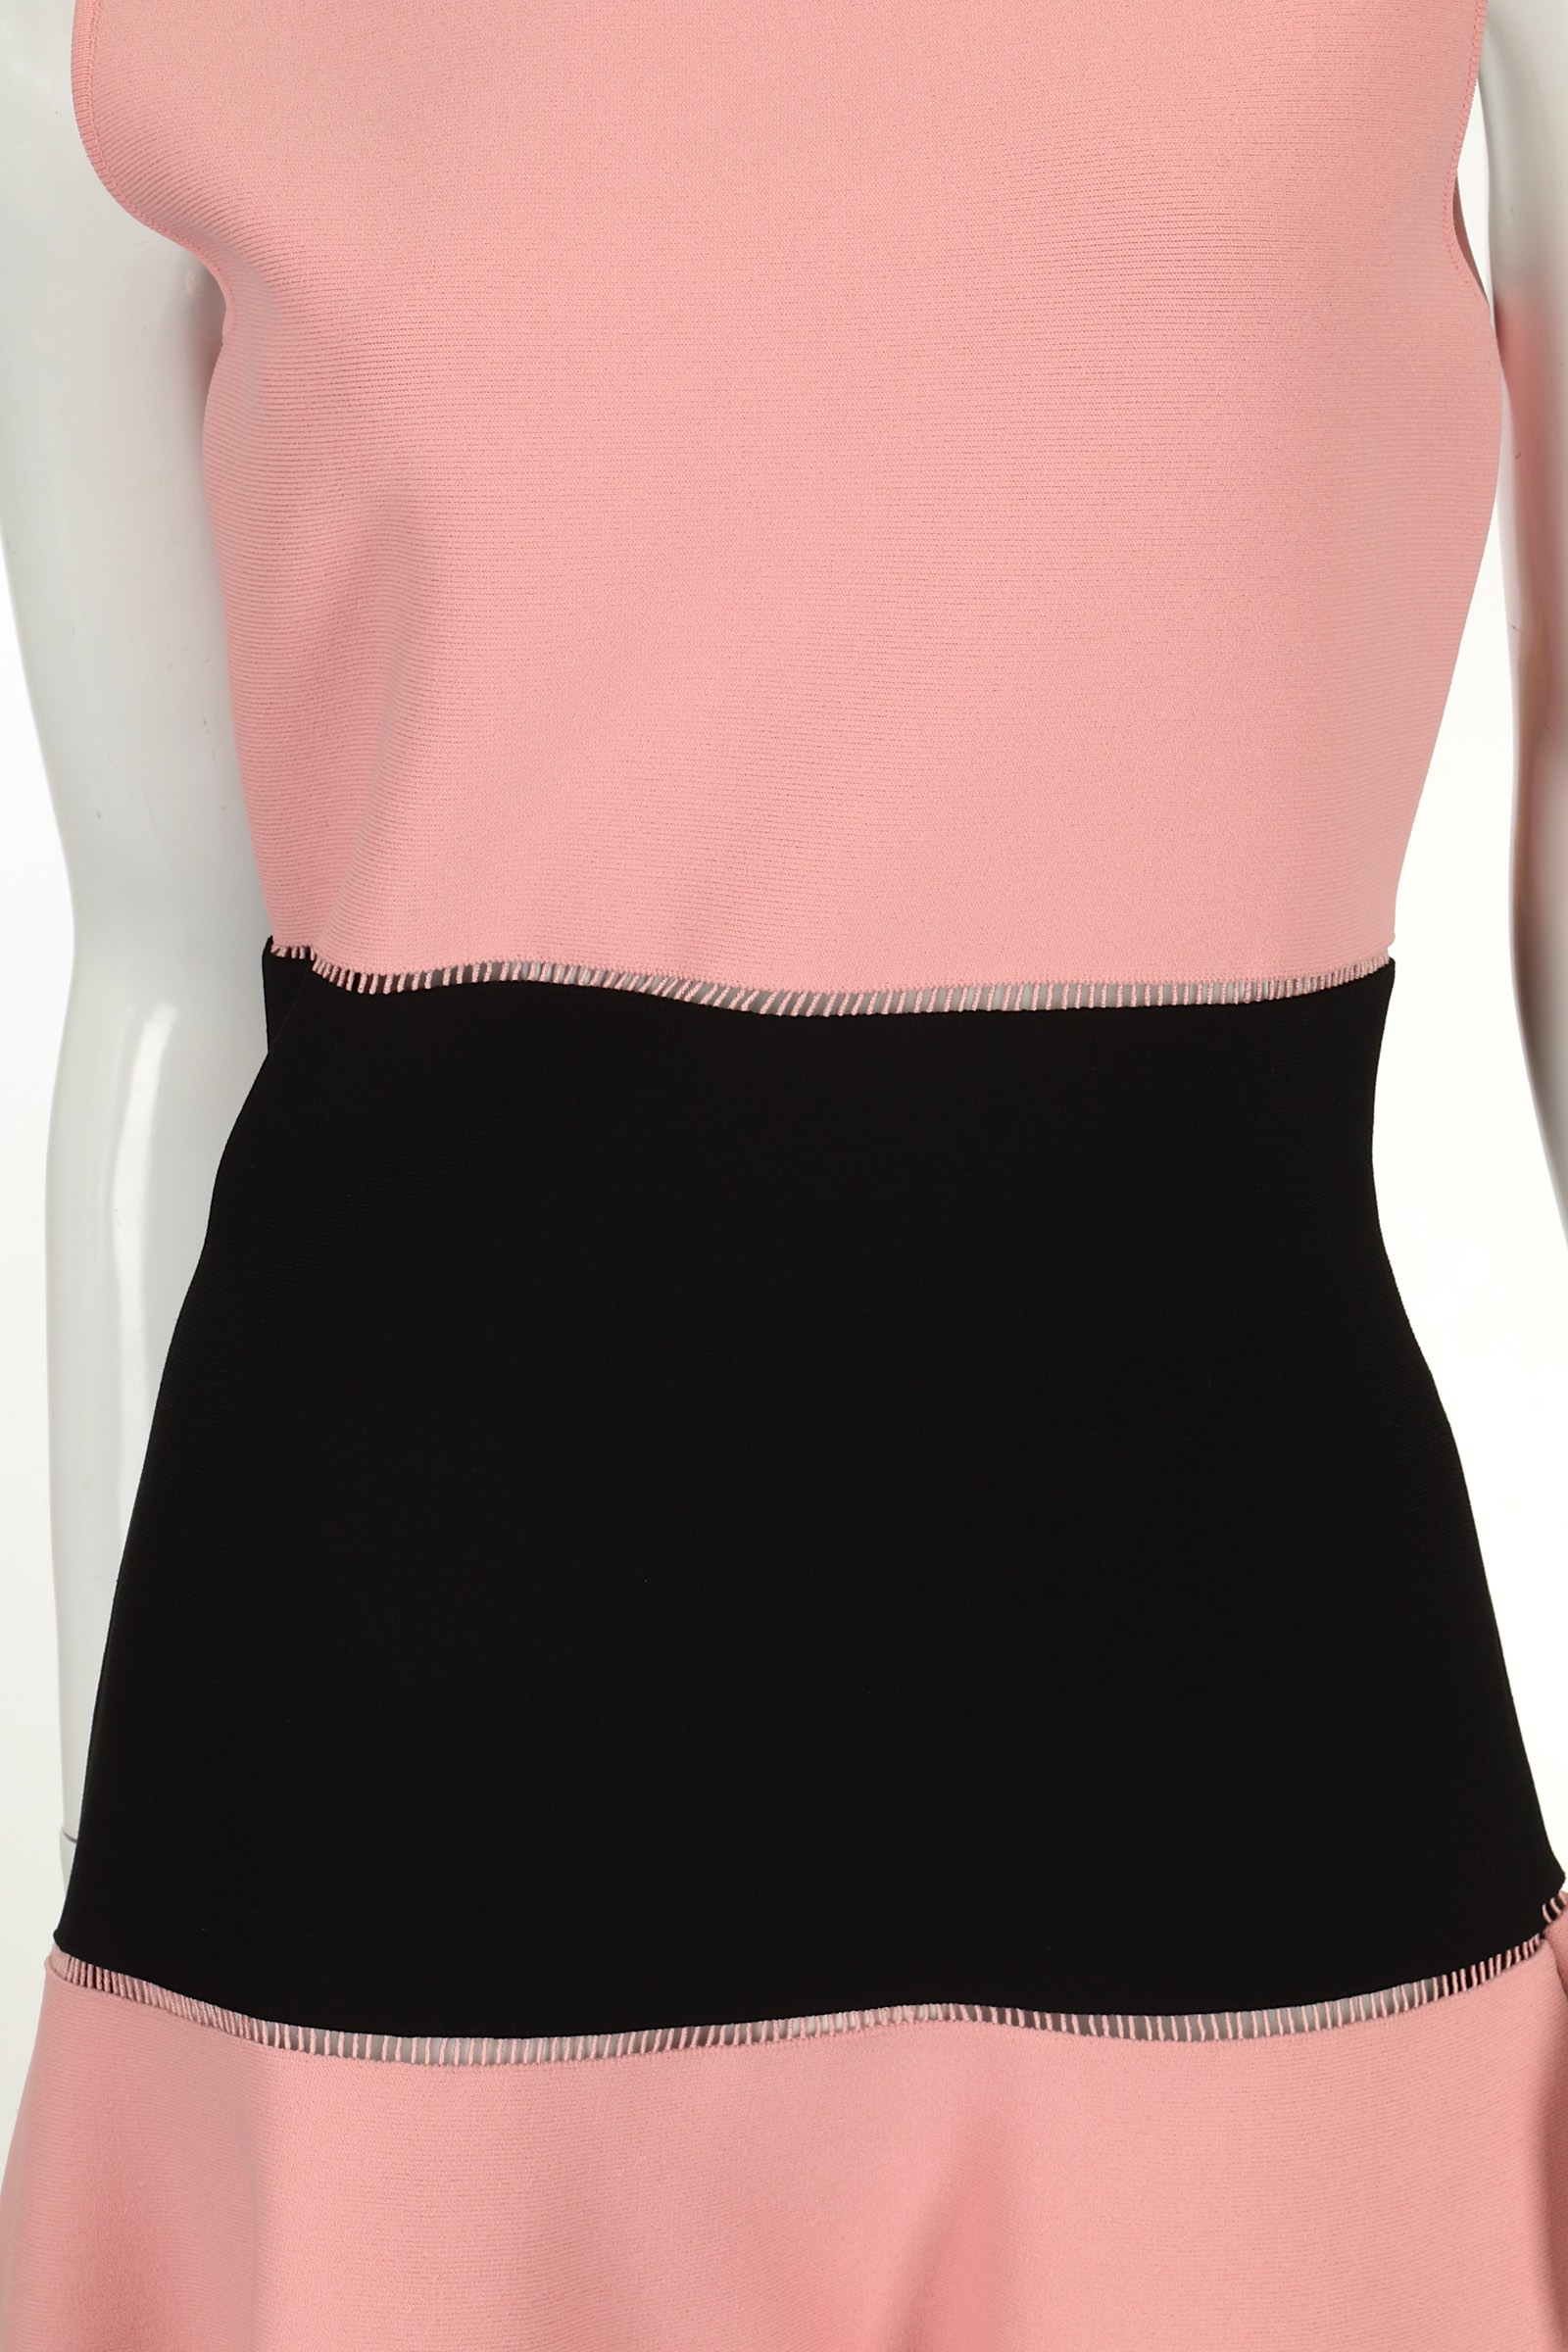 Alexander McQueen Pink and Black Dress, sleeveless with flaring skirt, labelled size XL, 17"/43cm - Image 3 of 8